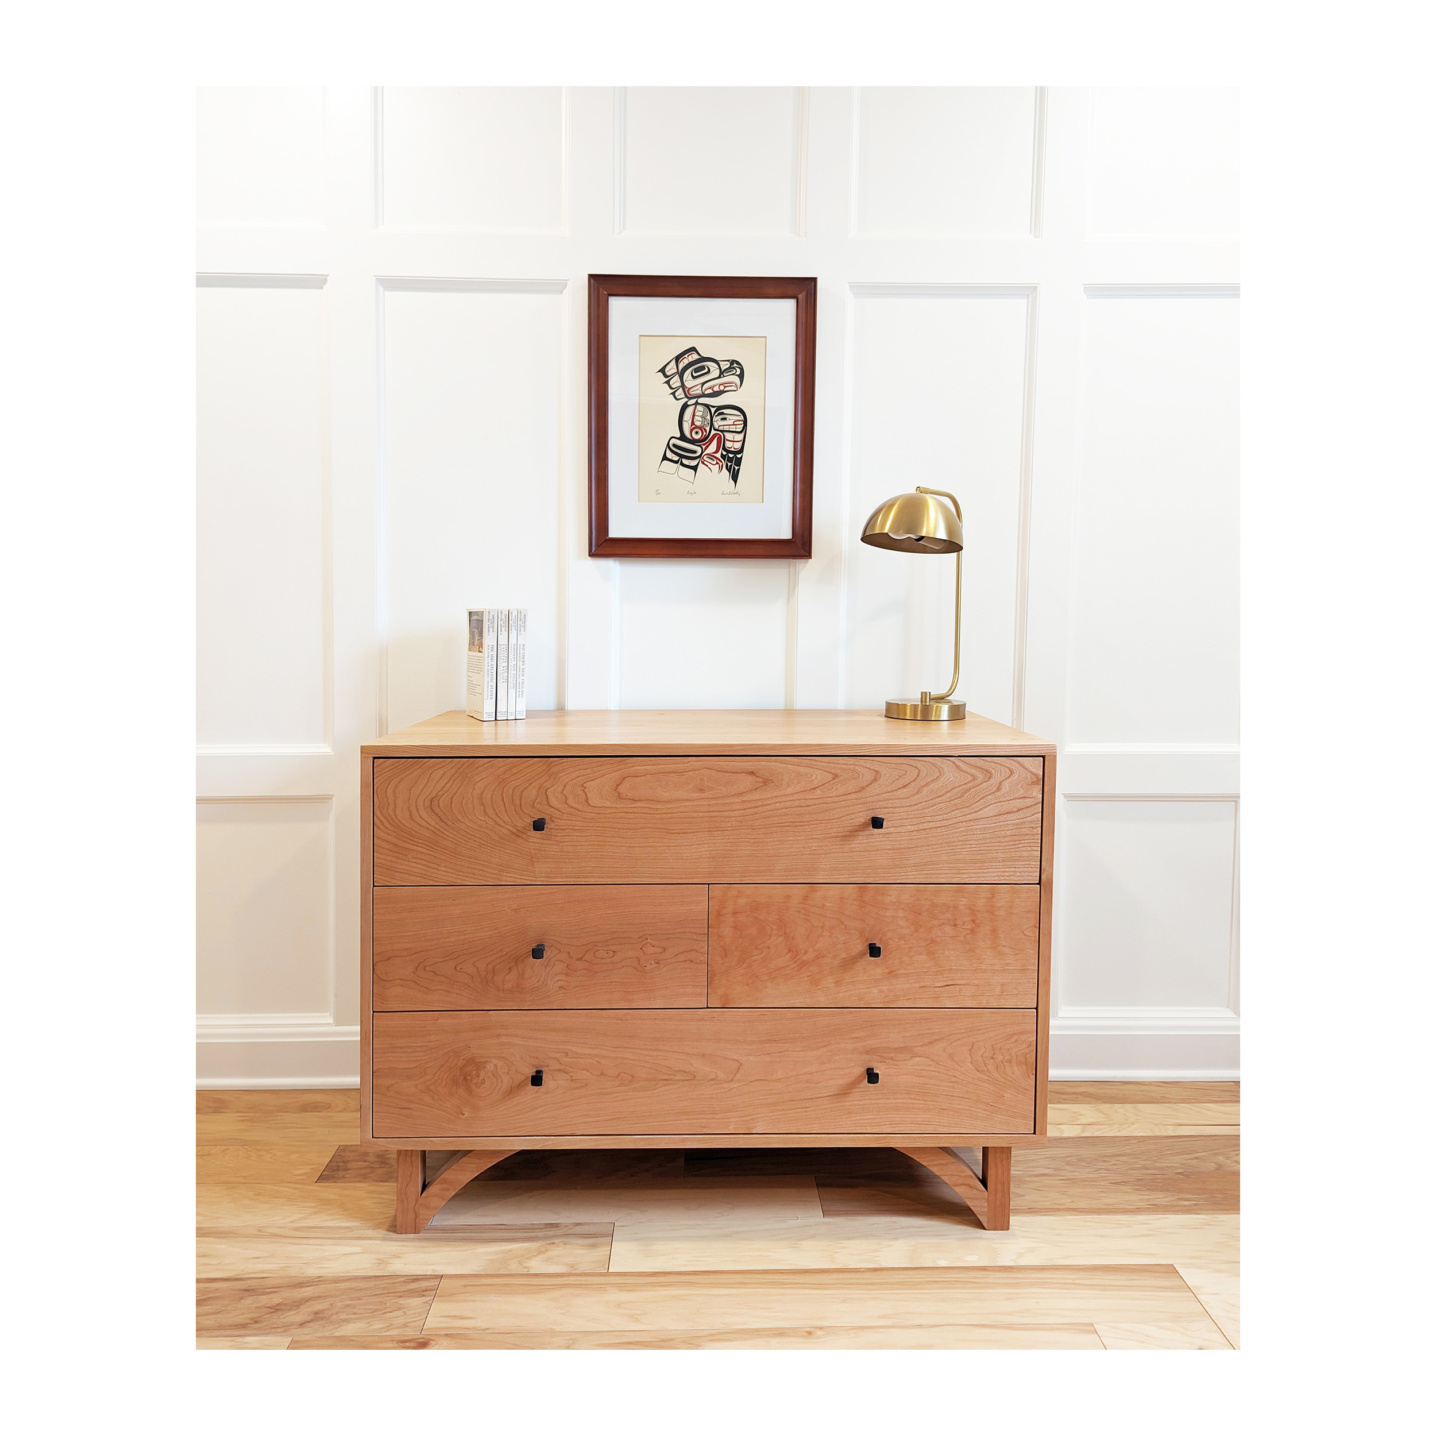 American handmade wood dresser--made only of solid woods